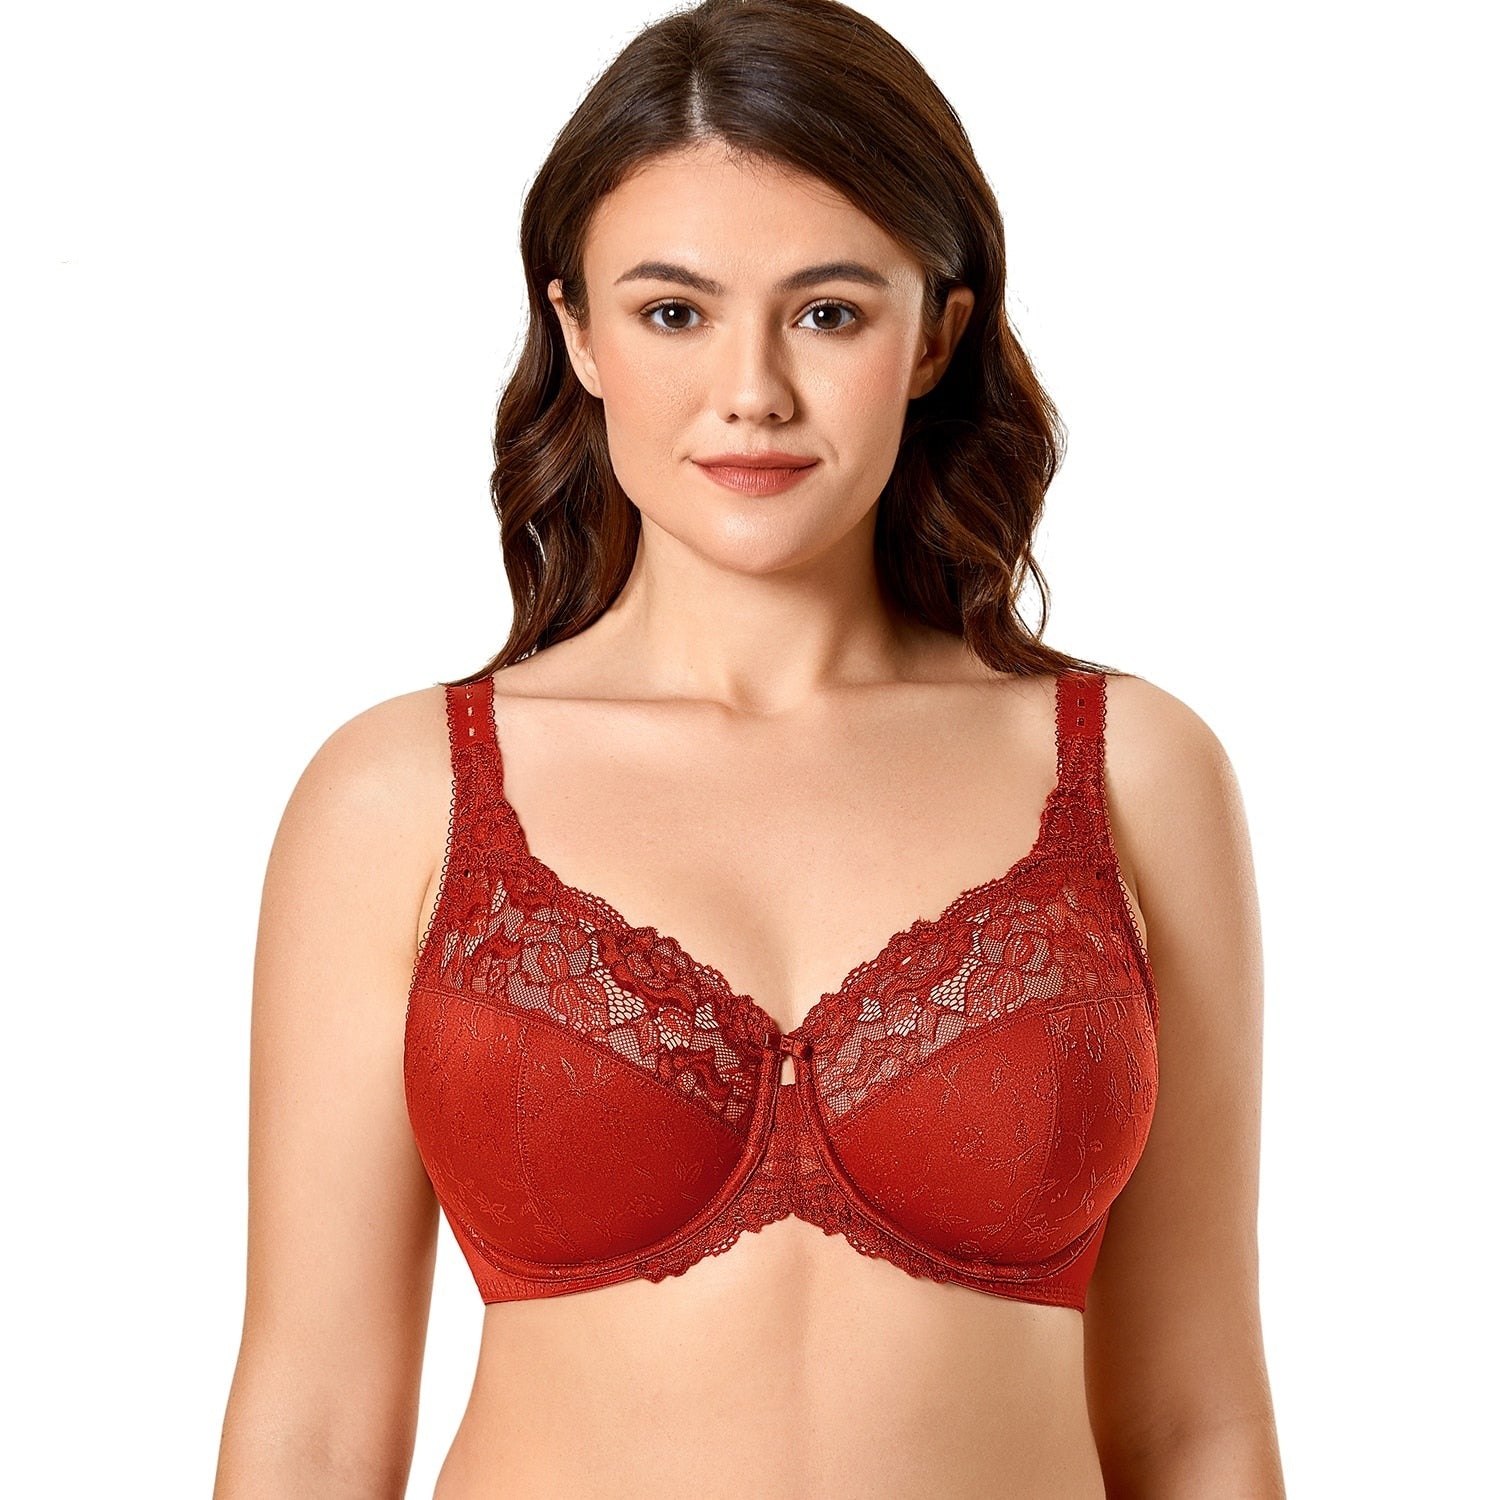 Lace Bras 36K, Bras for Large Breasts